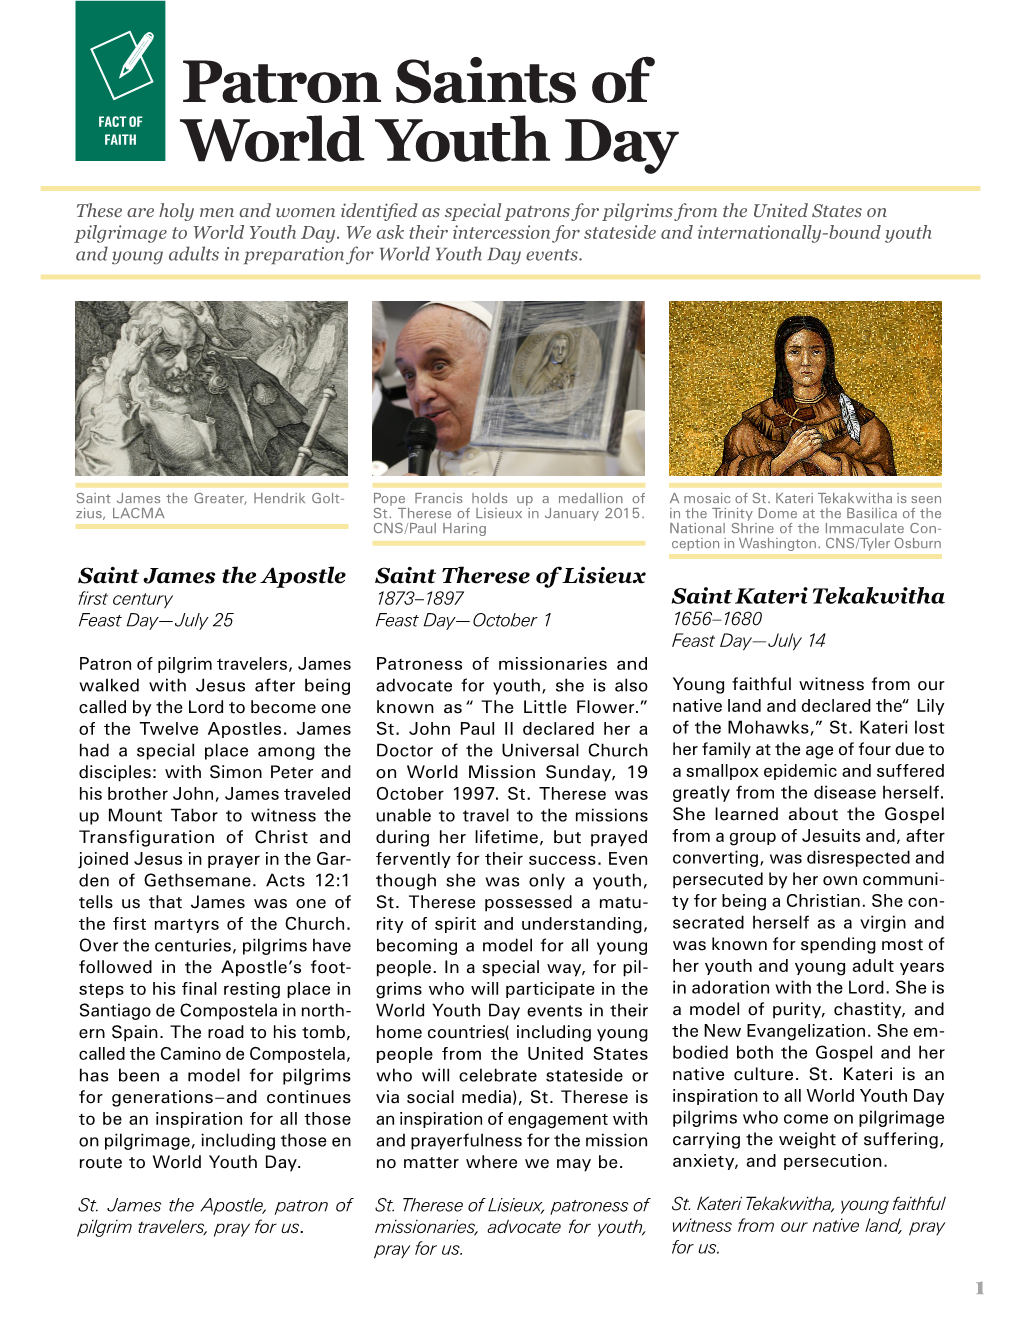 Patron Saints of World Youth Day